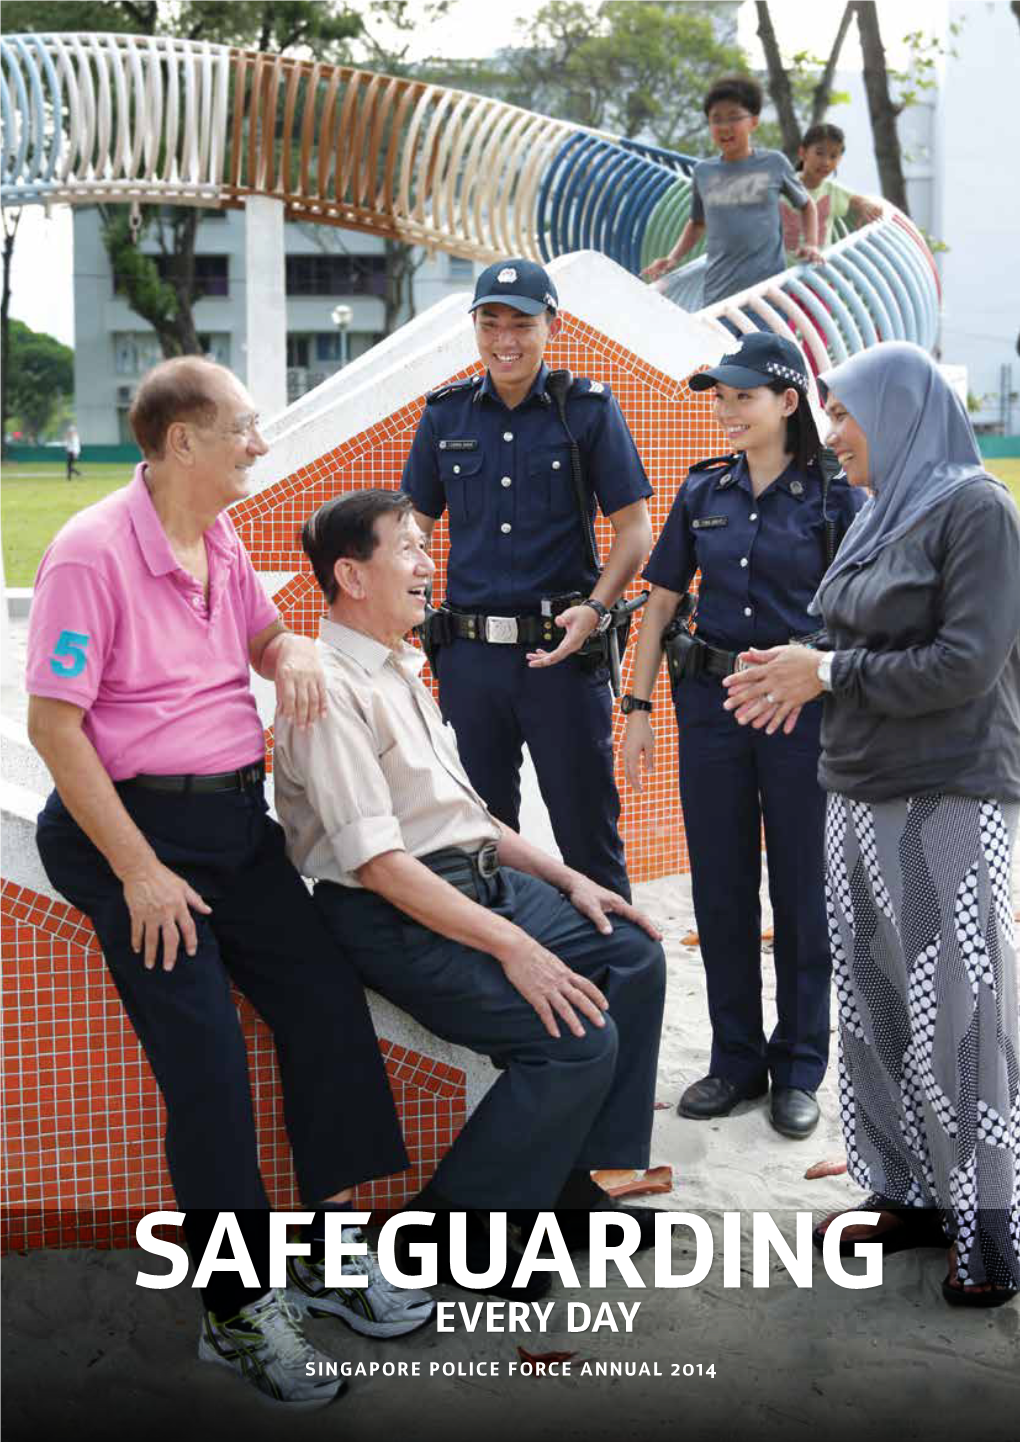 EVERY DAY SINGAPORE POLICE FORCE ANNUAL 2014 1 Protecting Our People, Our Homes and Our Community